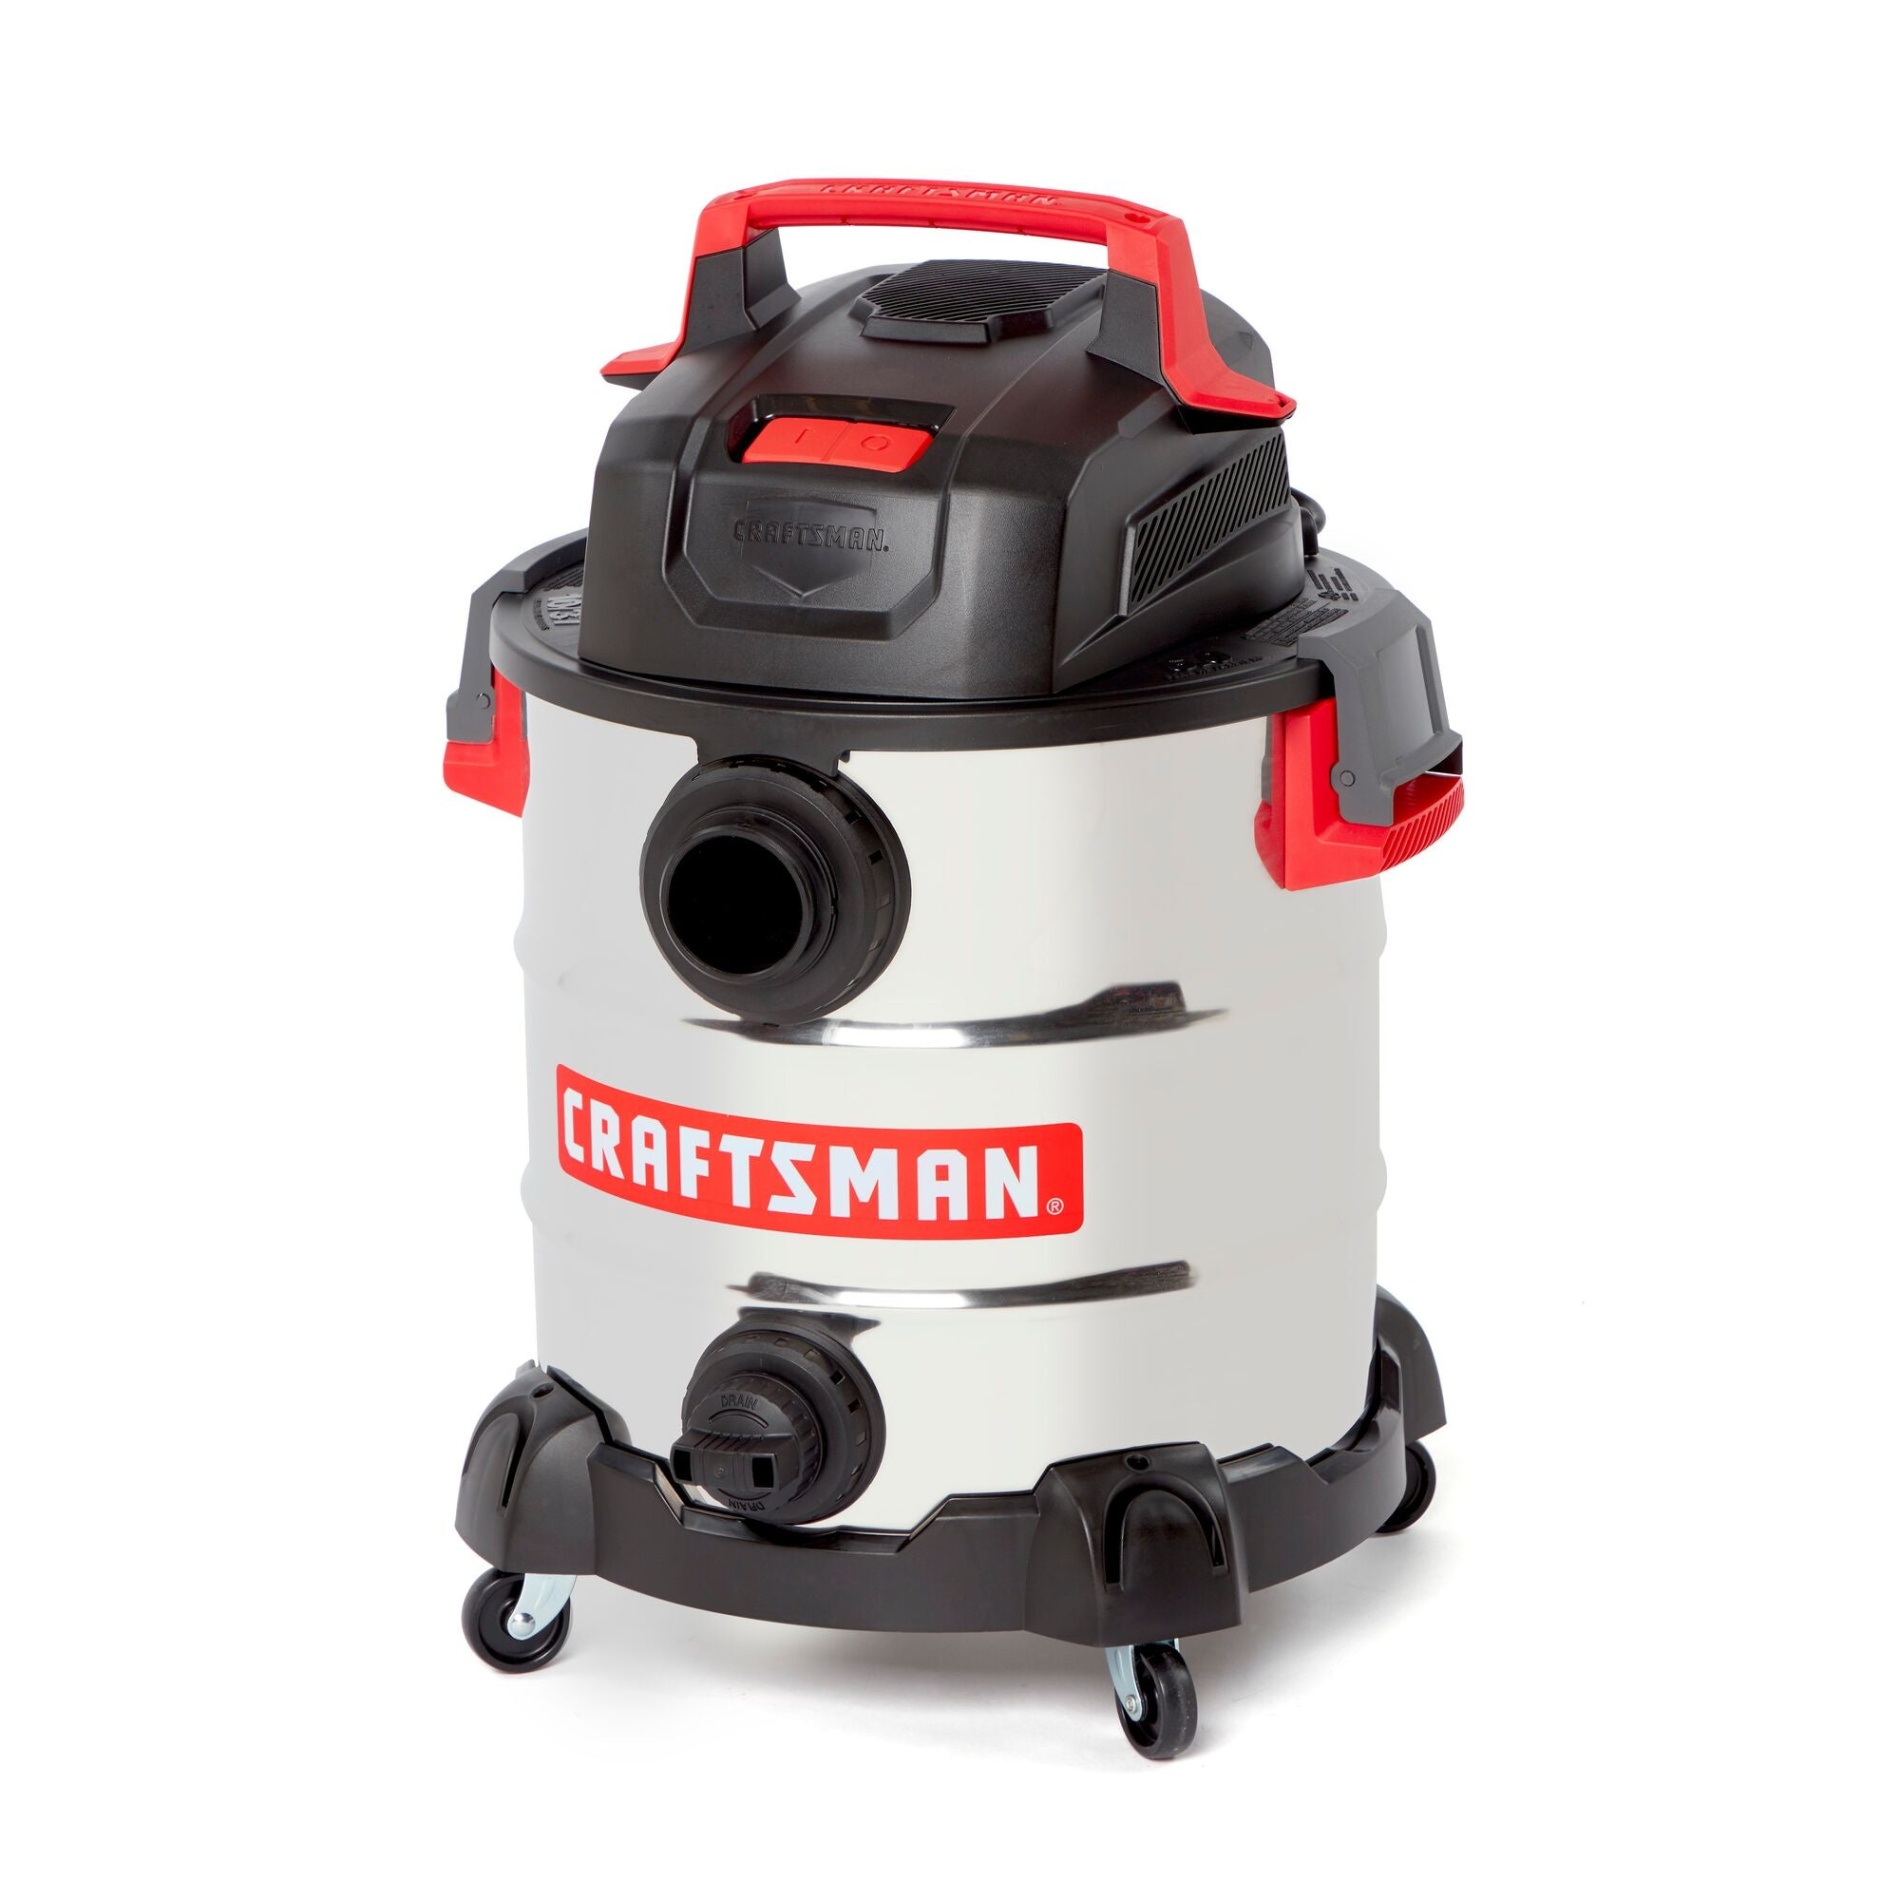 Upgrade Your Craftsman Shop Vac With Must-Have Accessories!